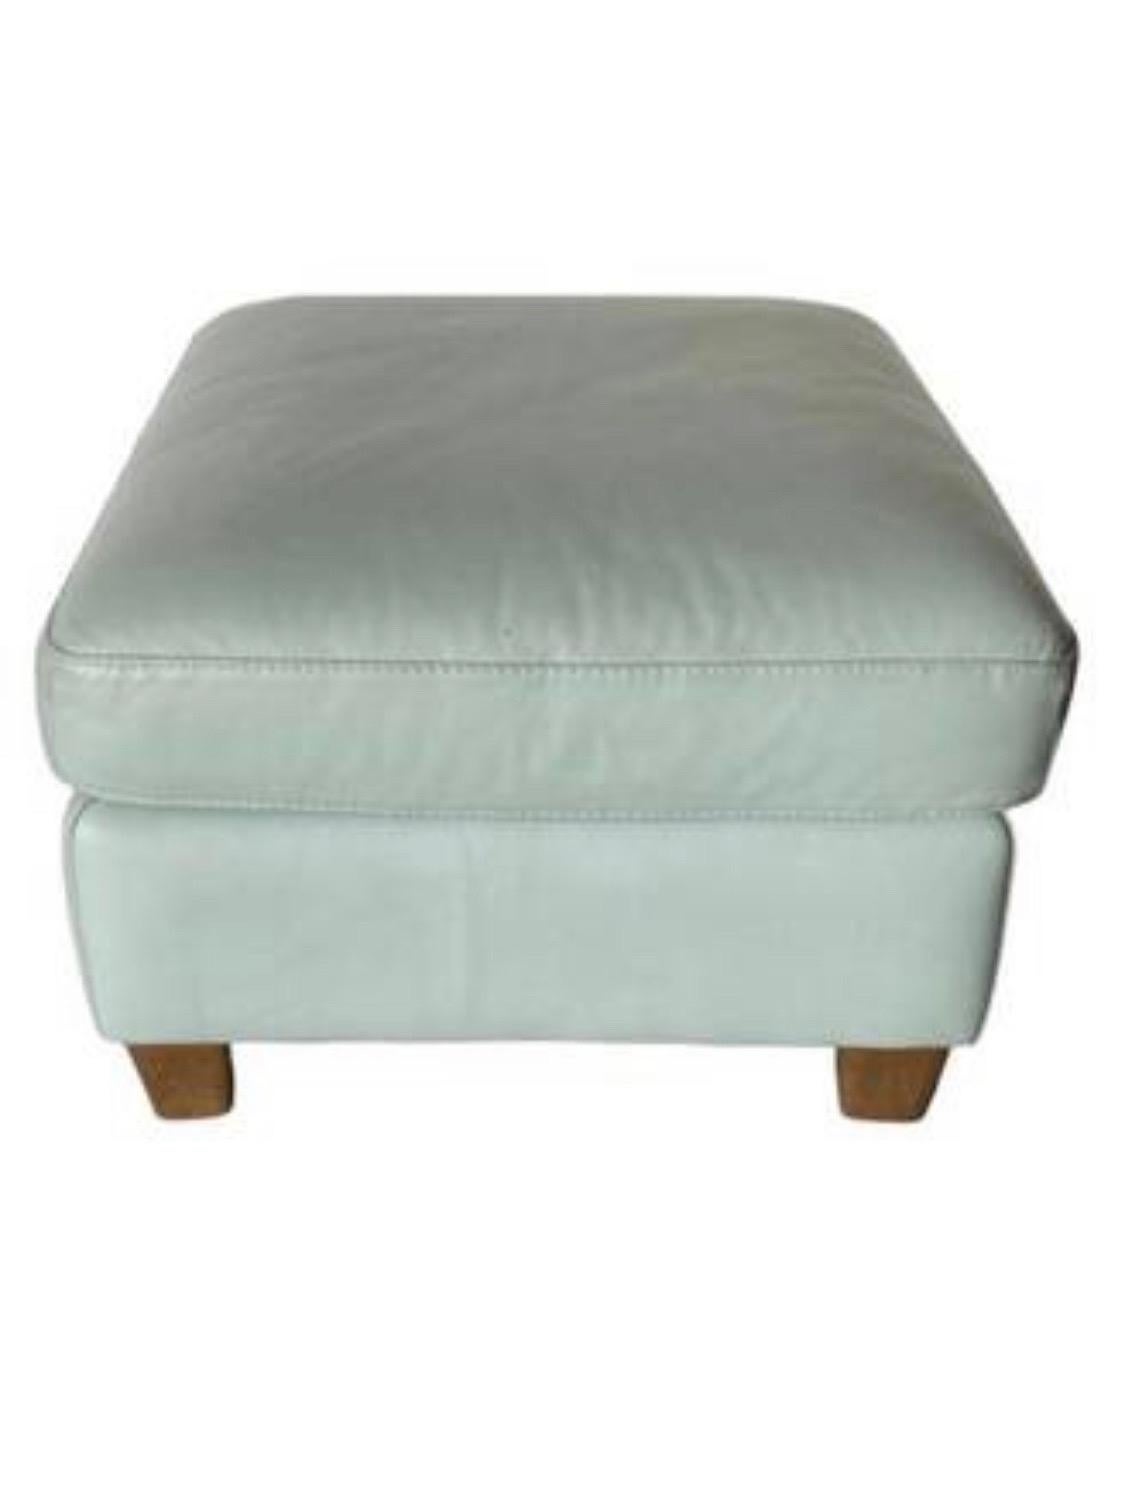 Beautiful leather contemporary square ottoman. Soft leather in seafoam green/teal hue. Solid wood legs. No tears or cracking. In great shape and large enough to comfortably sit on.
24”x24”x17” tall.